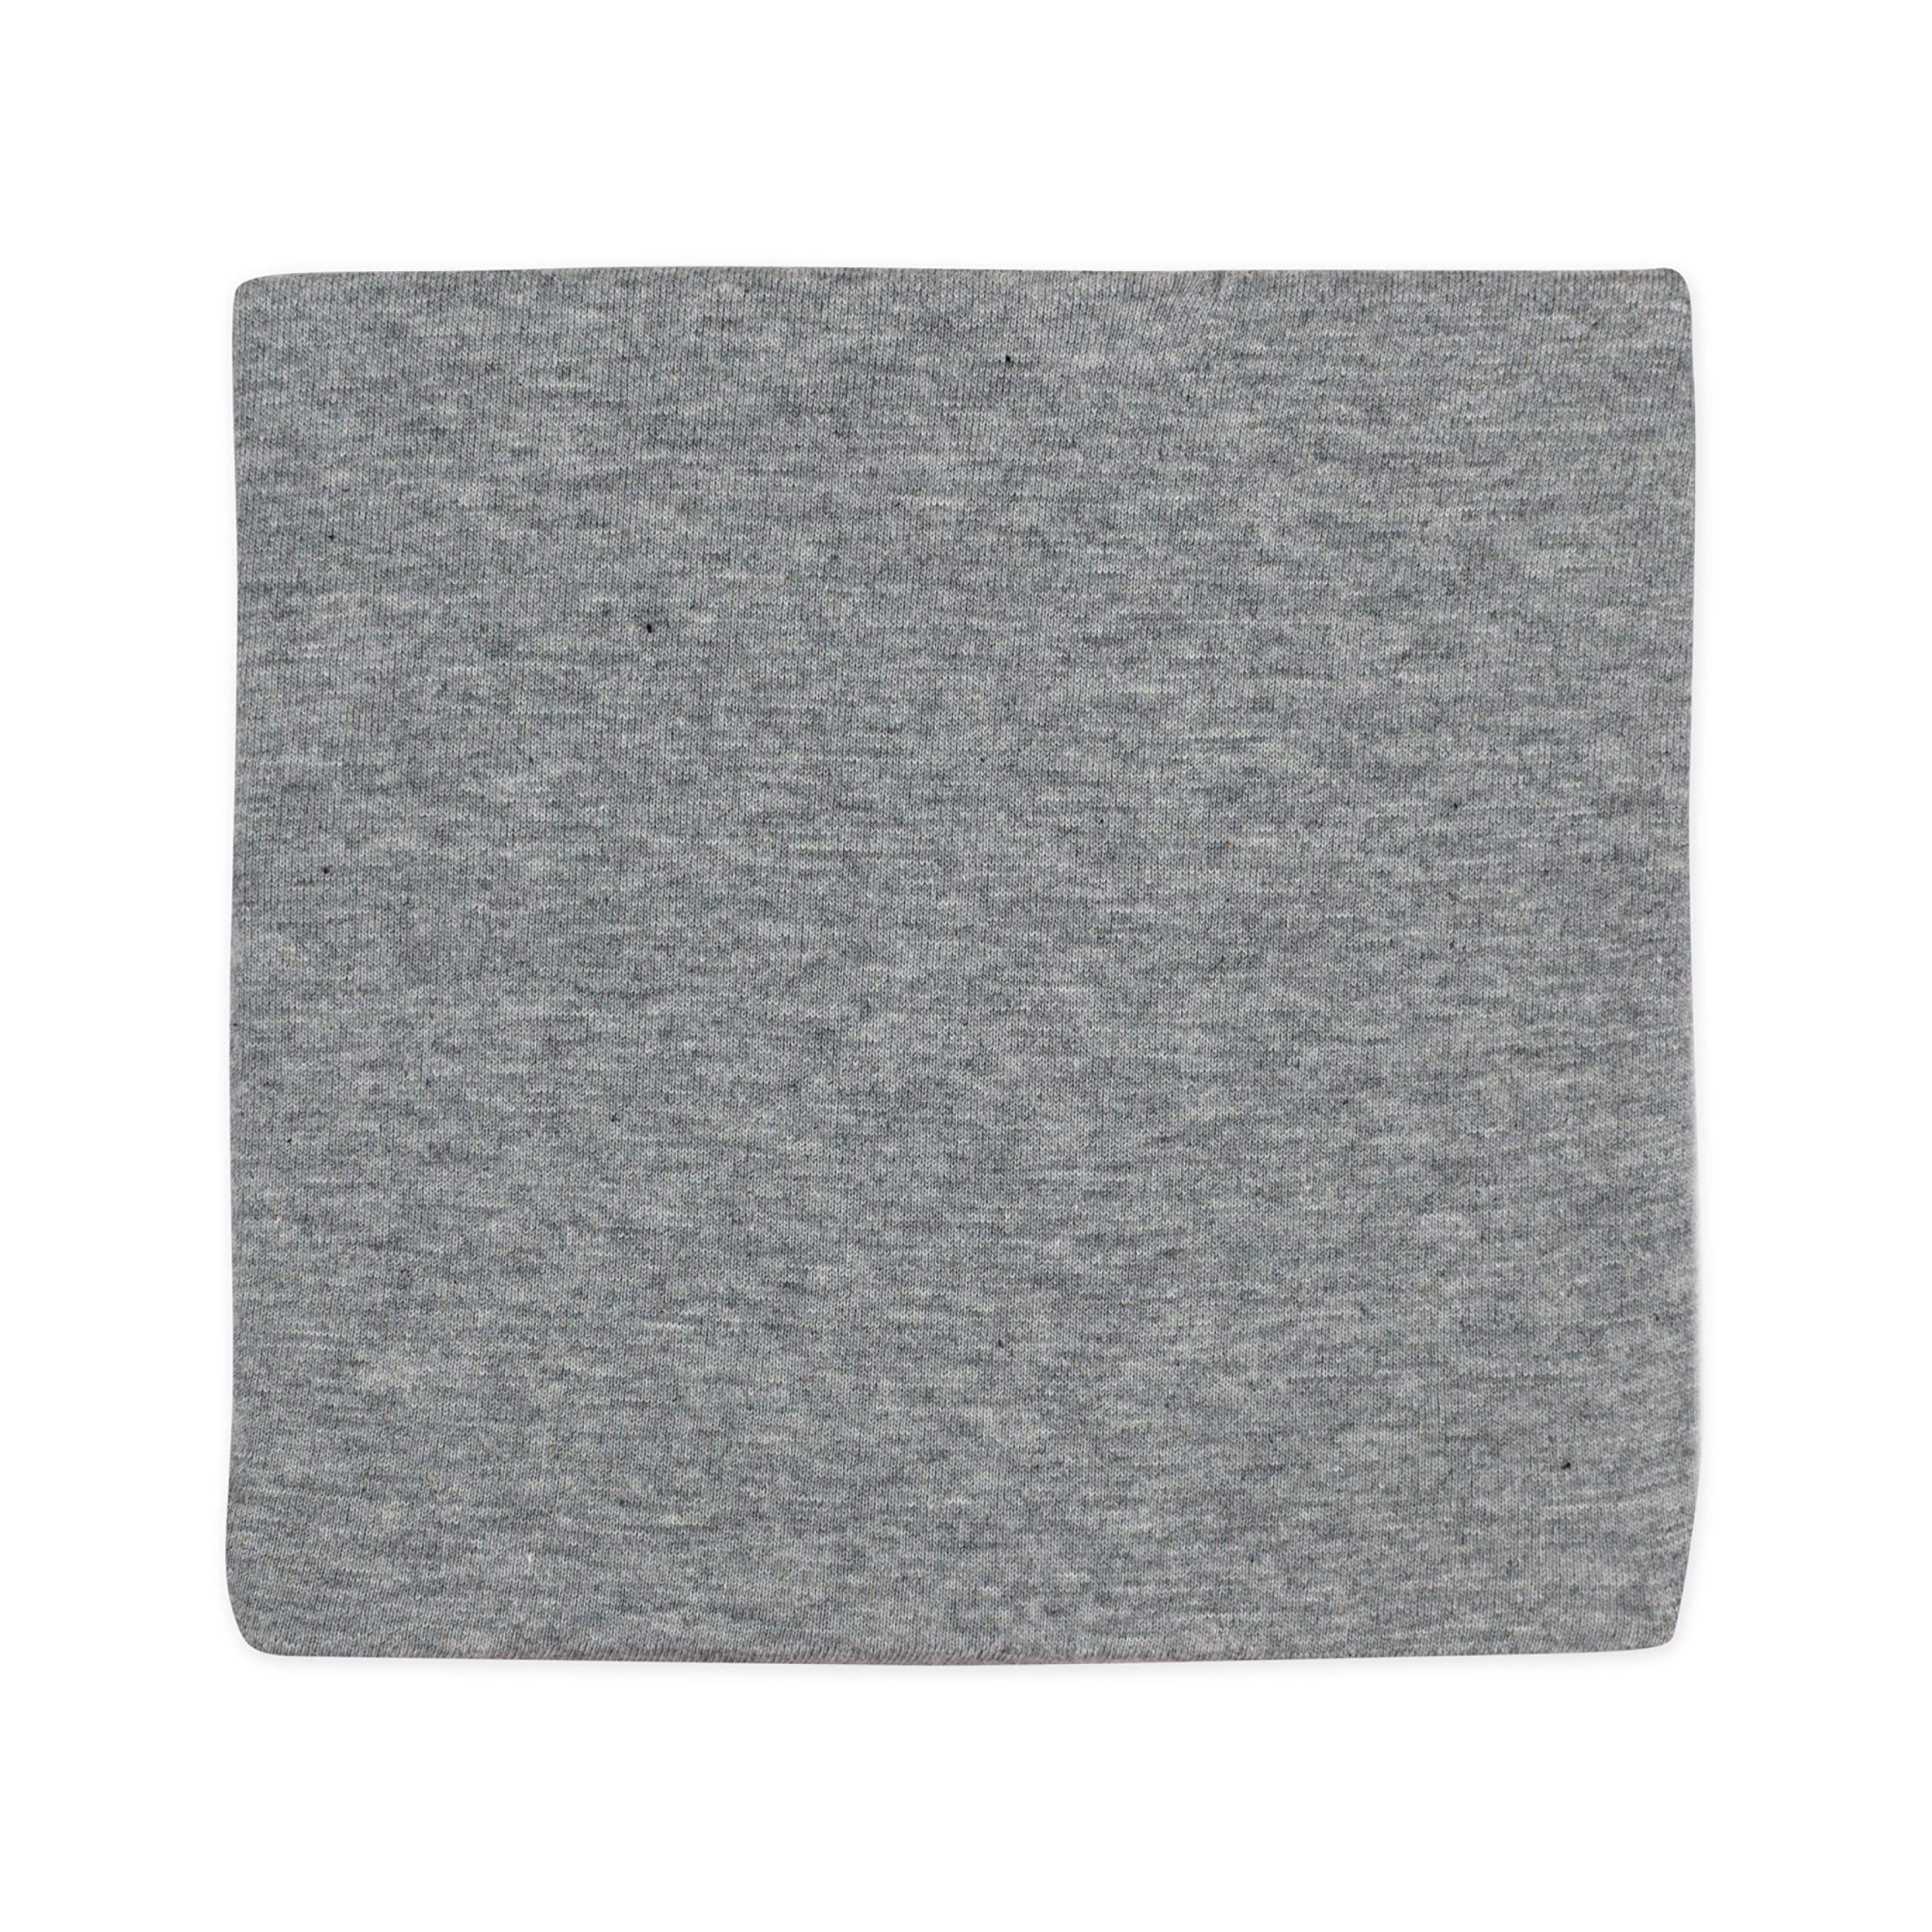 HonestBaby unisex baby Organic Cotton Changing Pad Cover and Toddler Sleepers, Gray Heather, One Size US